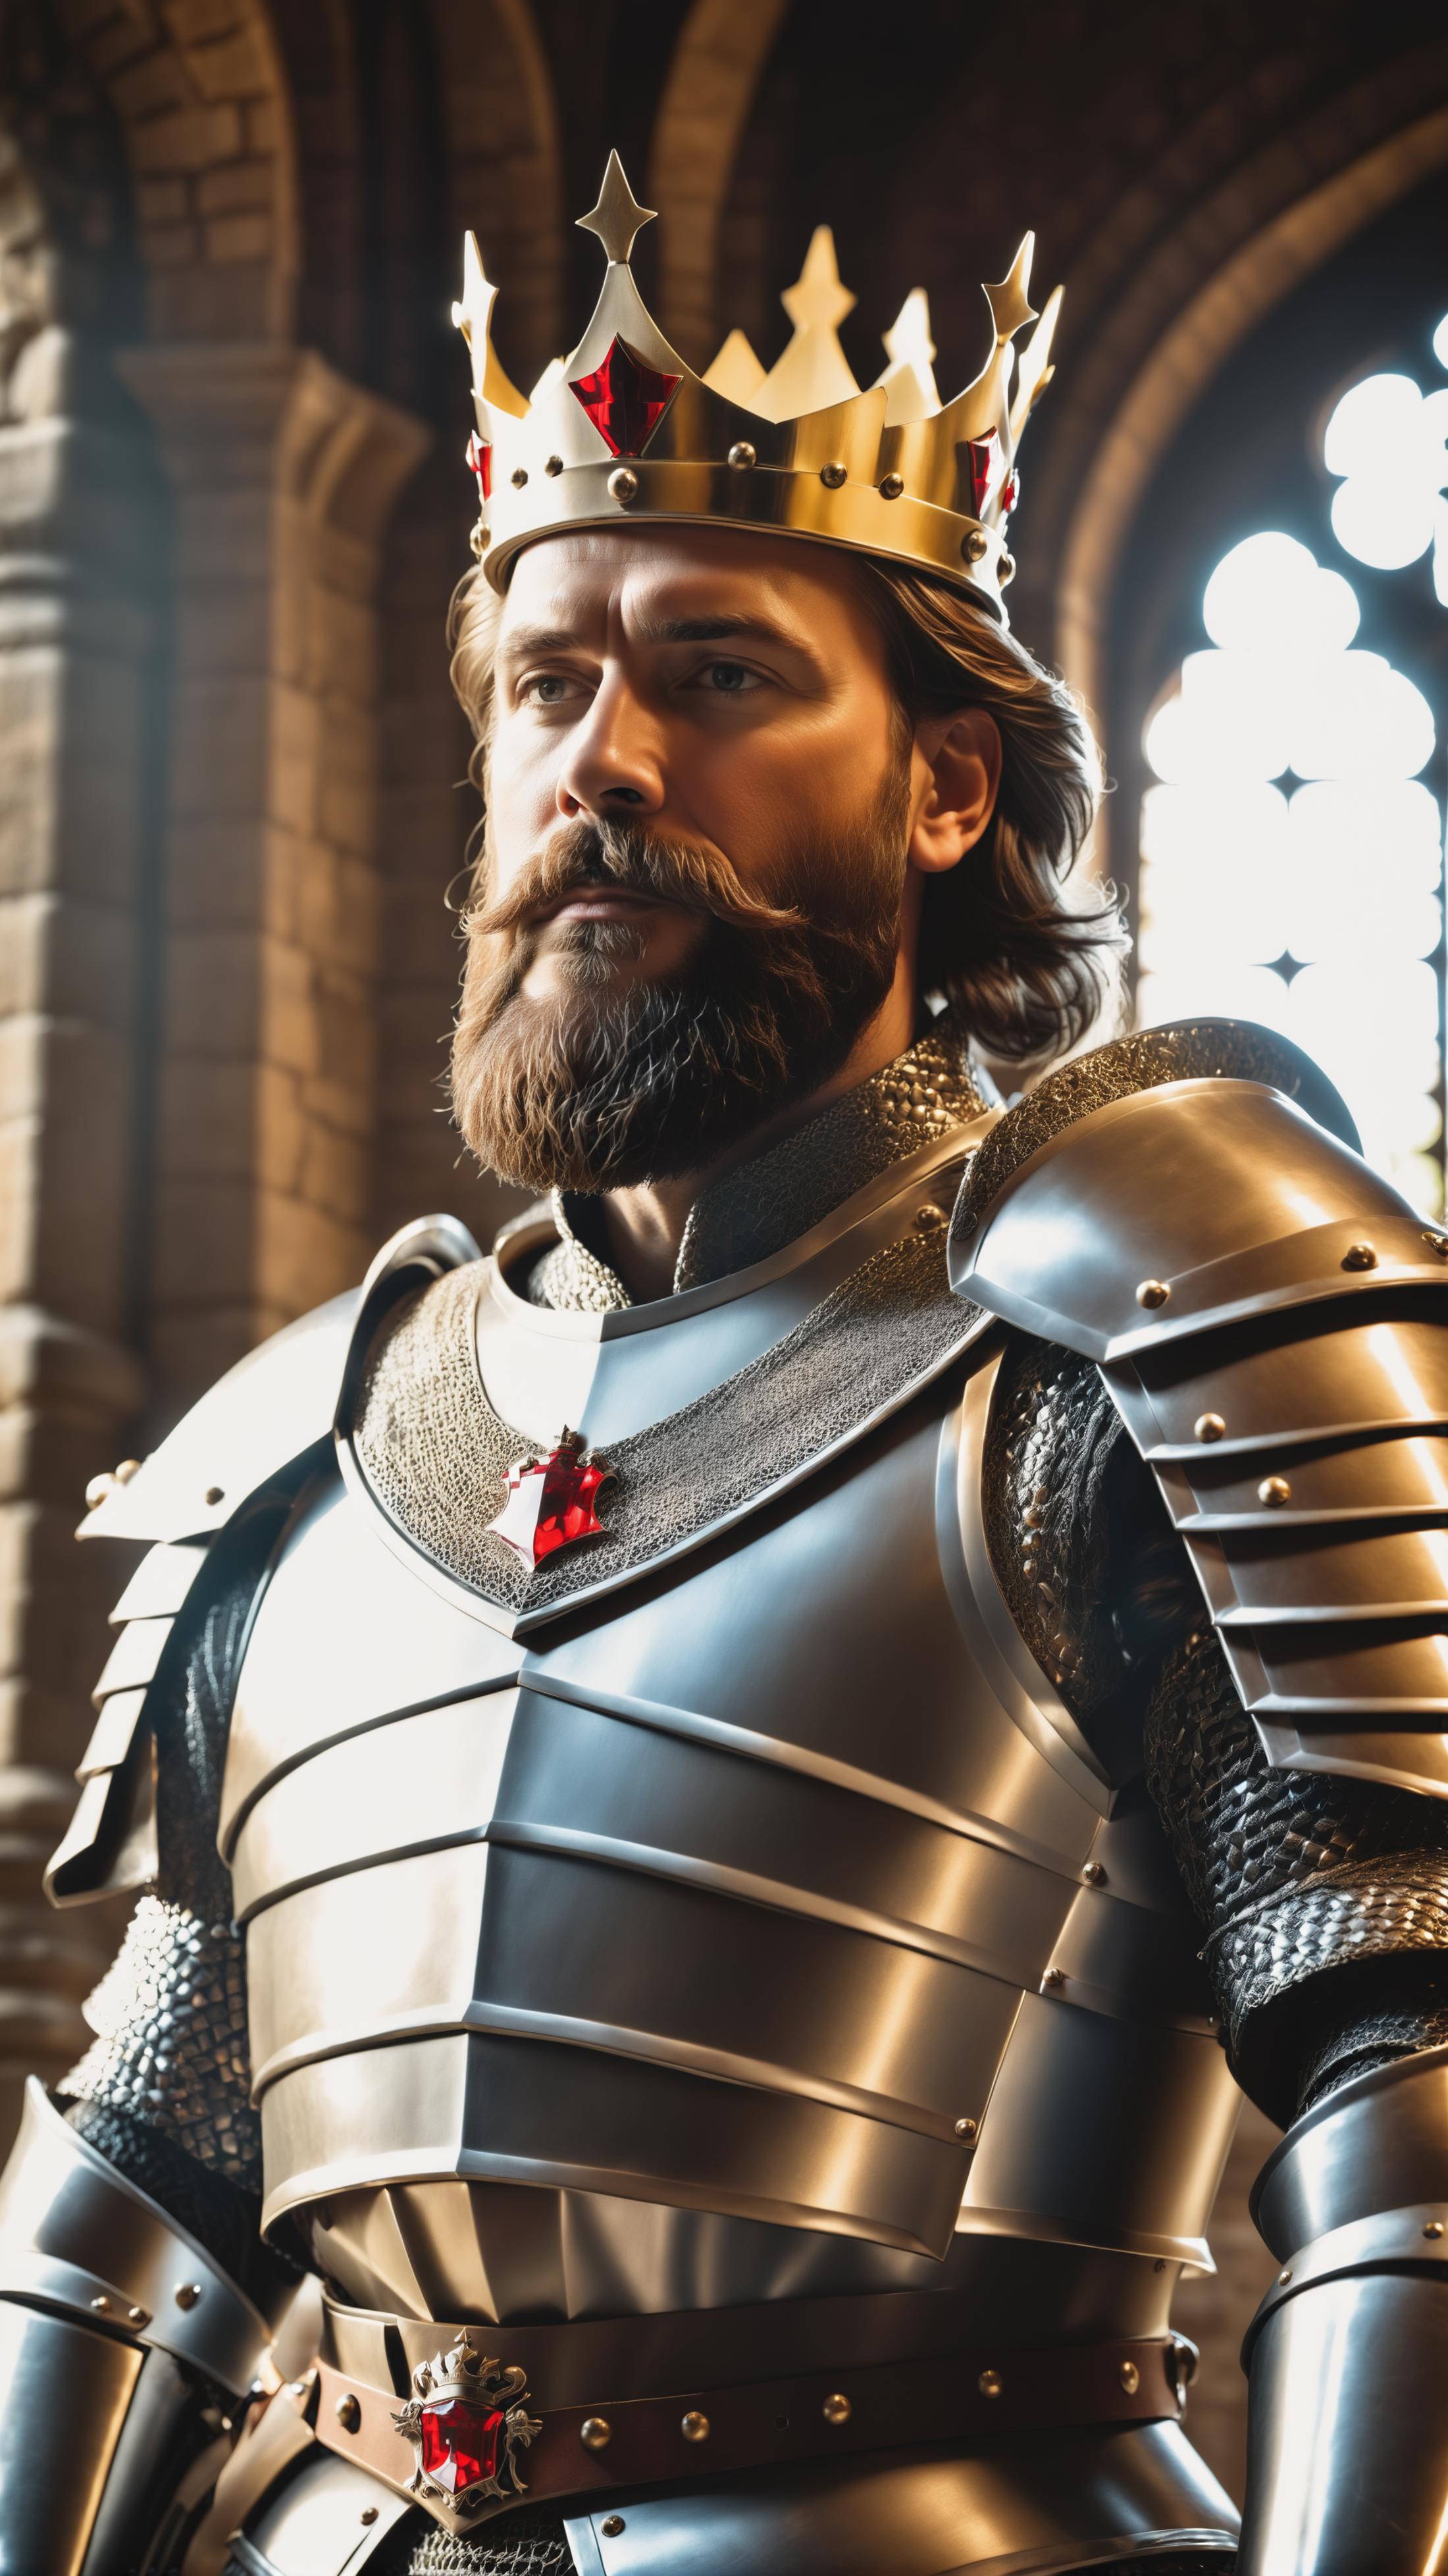 Man wearing a suit of armor with a beard and mustache.